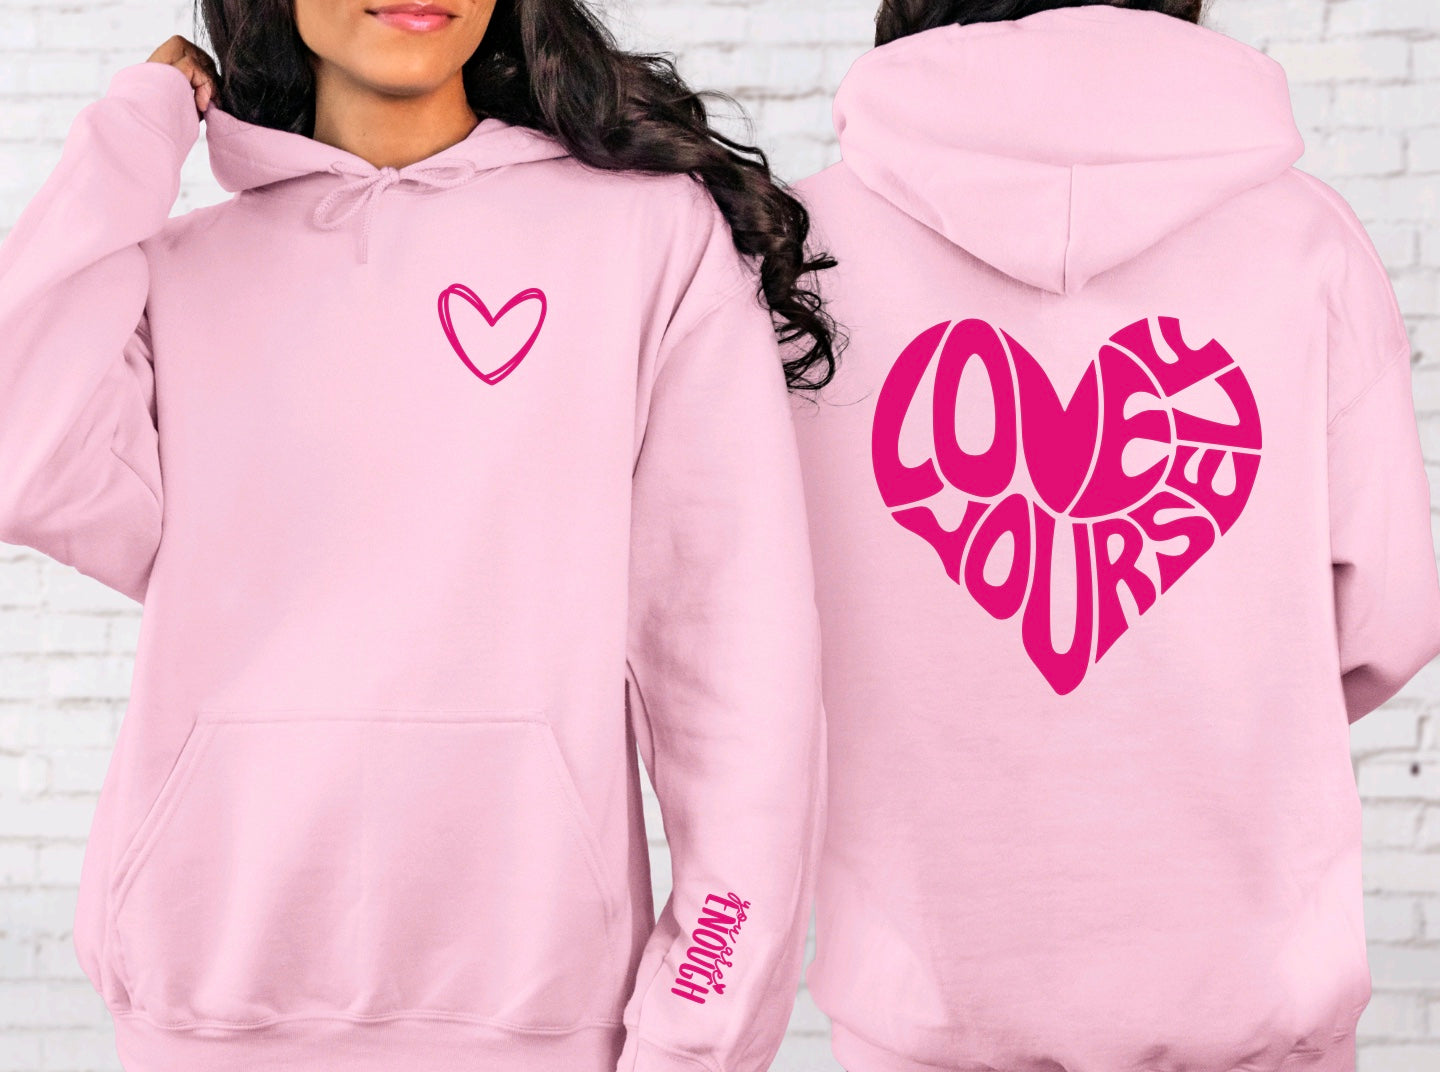 Love yourself unisex hoodie with sleeve design in pink with pink graphic 